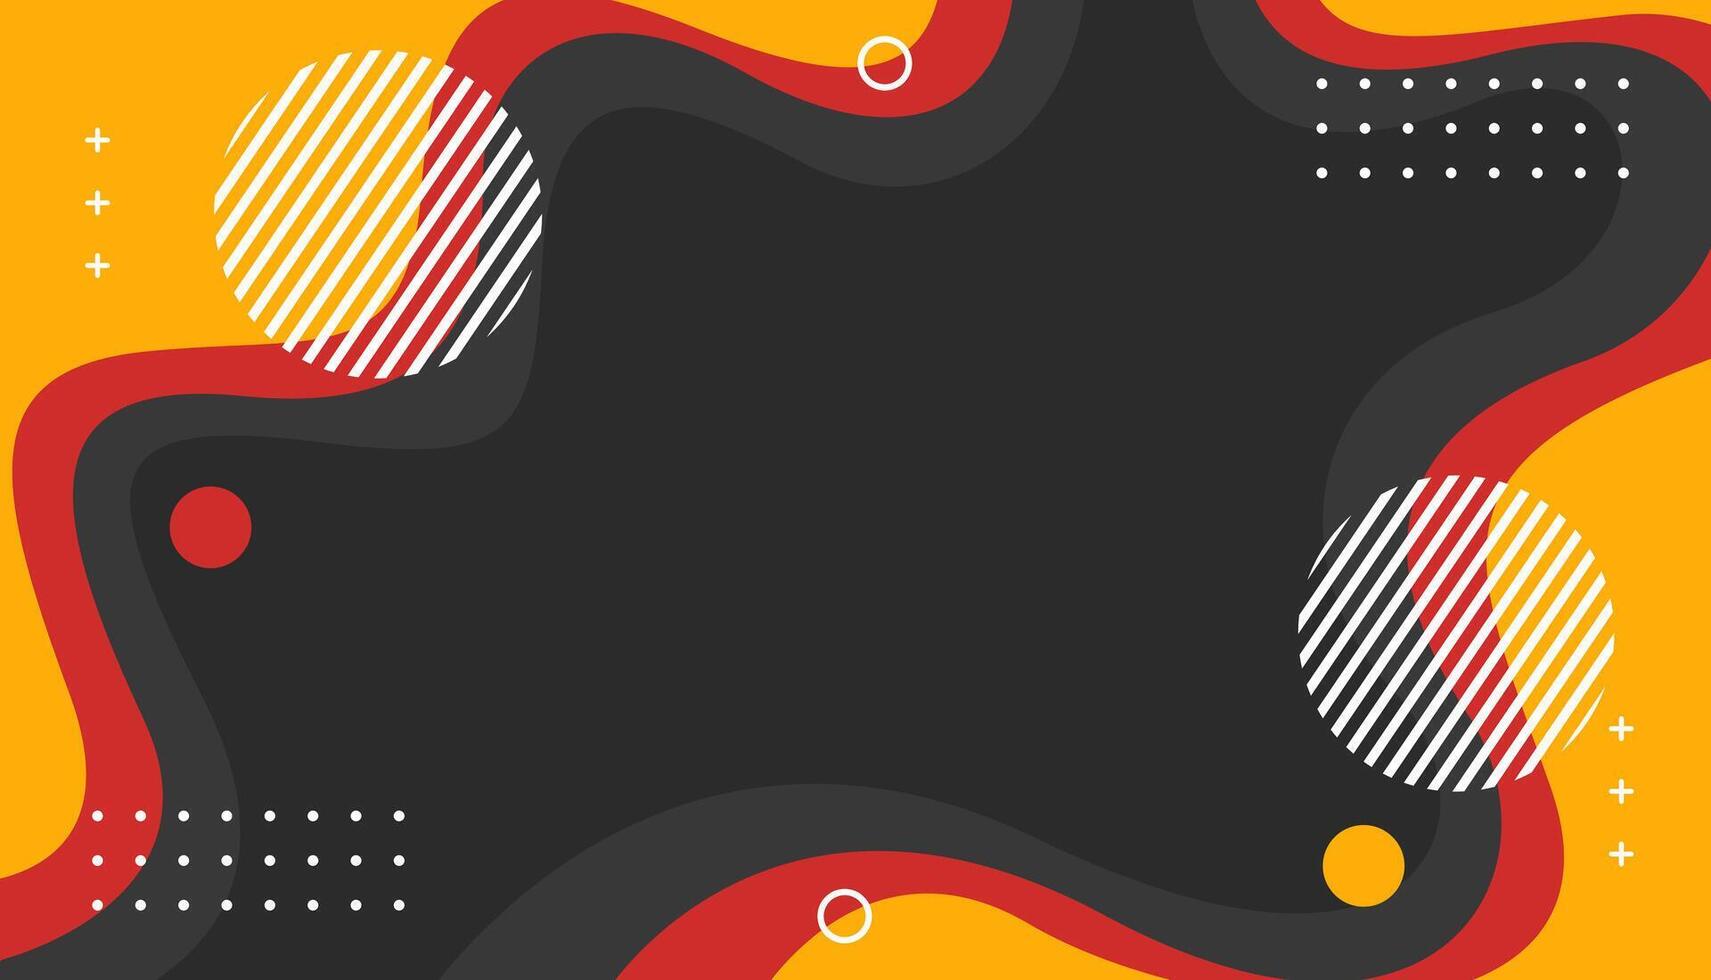 Black, red and orange wavy background. Abstract geometric wallpaper in flat style. Suitable for web design, templates, banners, cards, covers and others vector